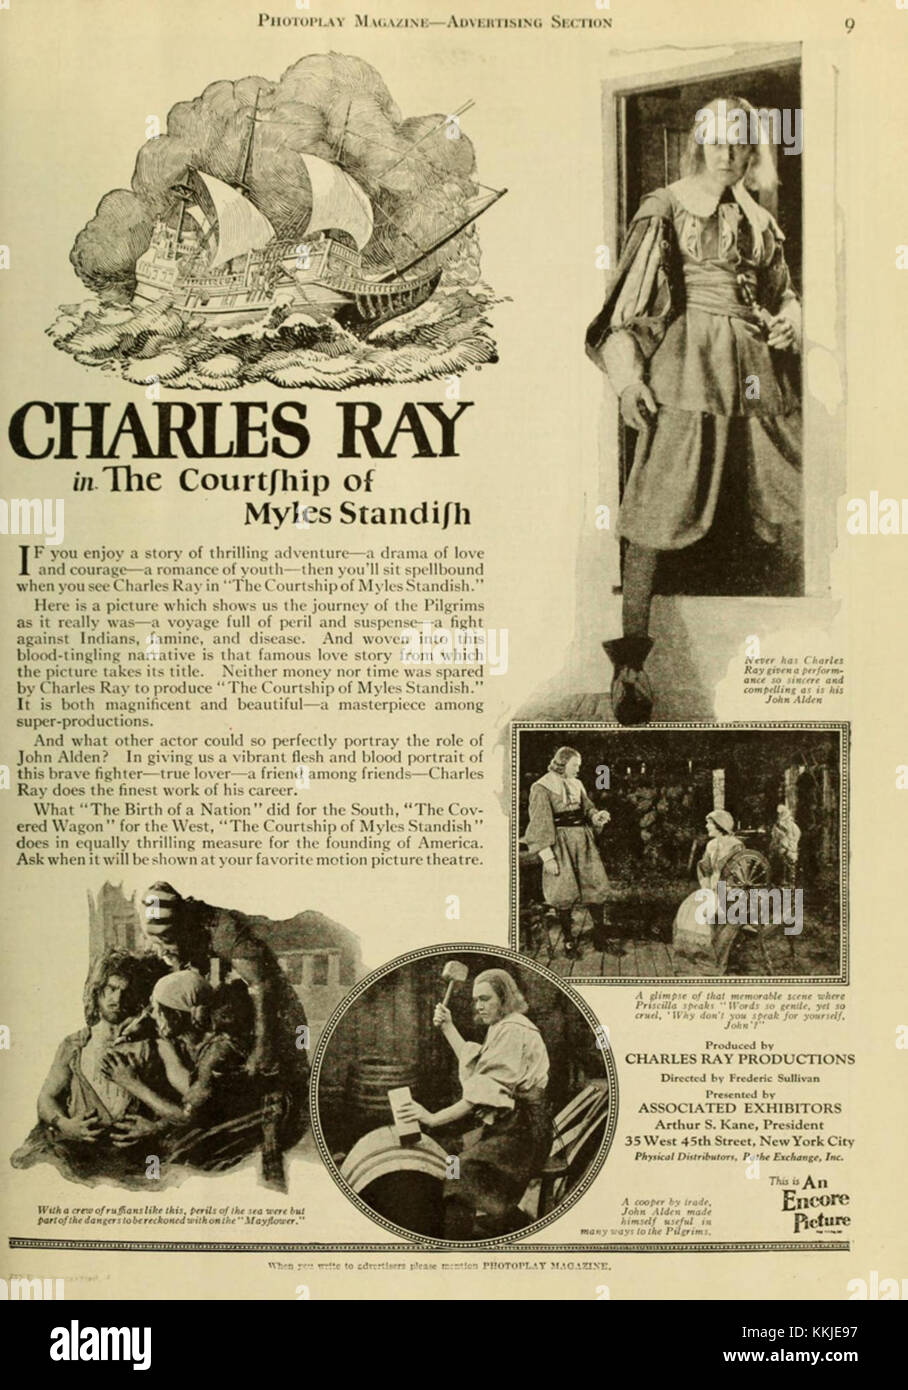 Courship-of-myles-standish - charles-ray-vintage-photoplay-advert1923 Stock Photo